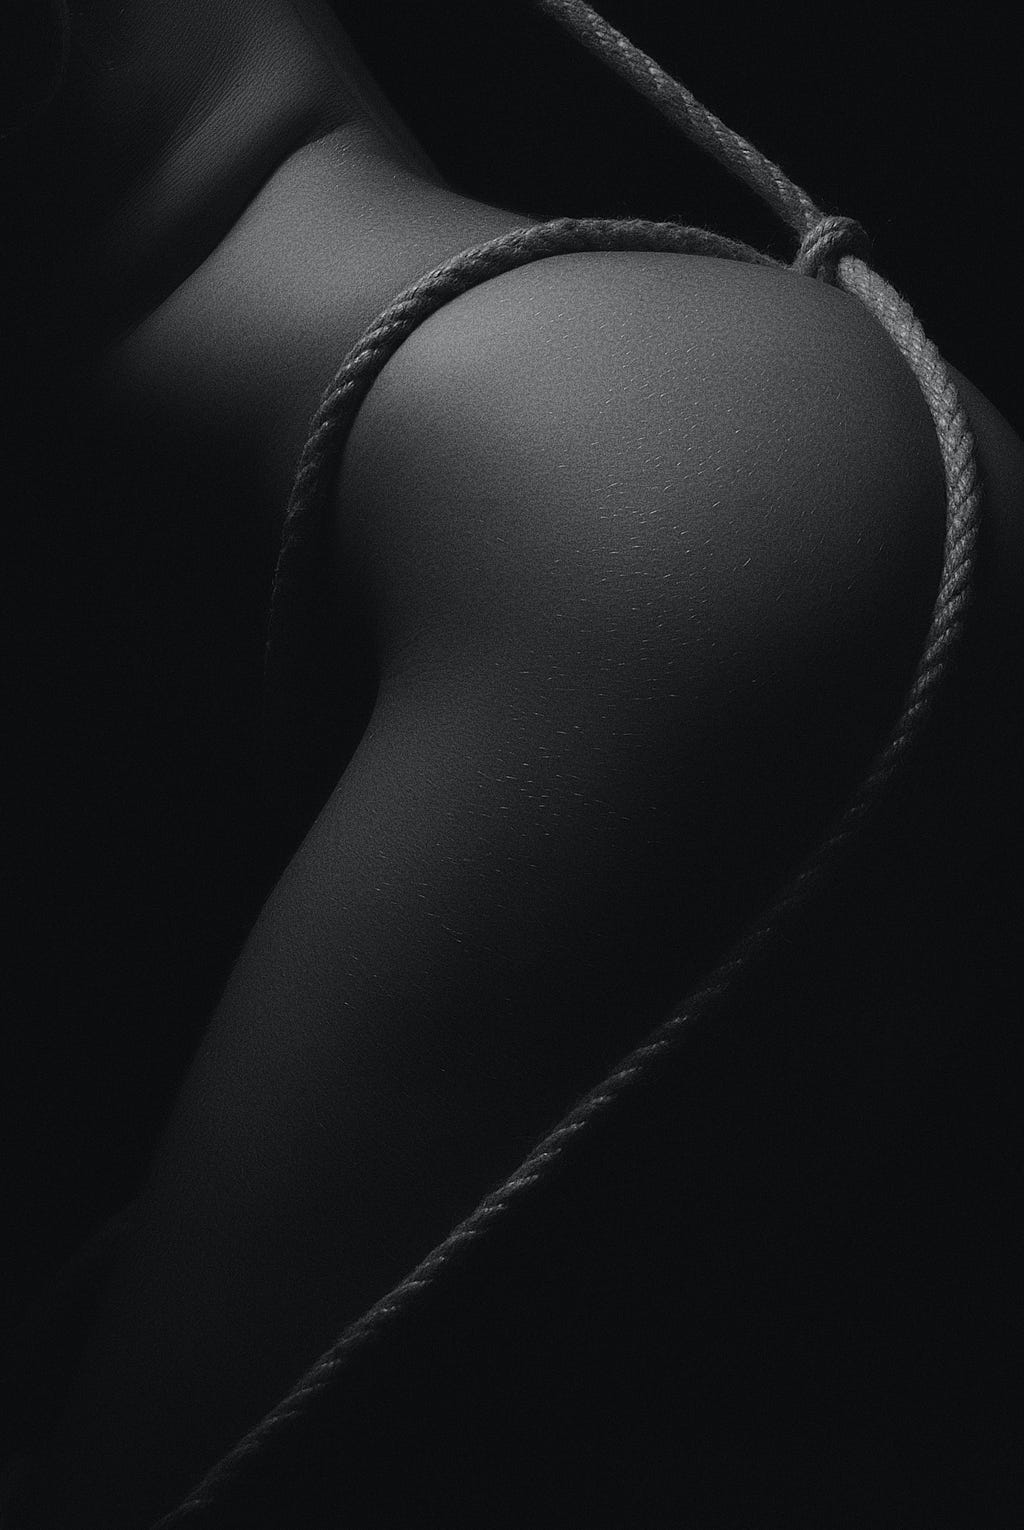 A female bottom with a rope around it